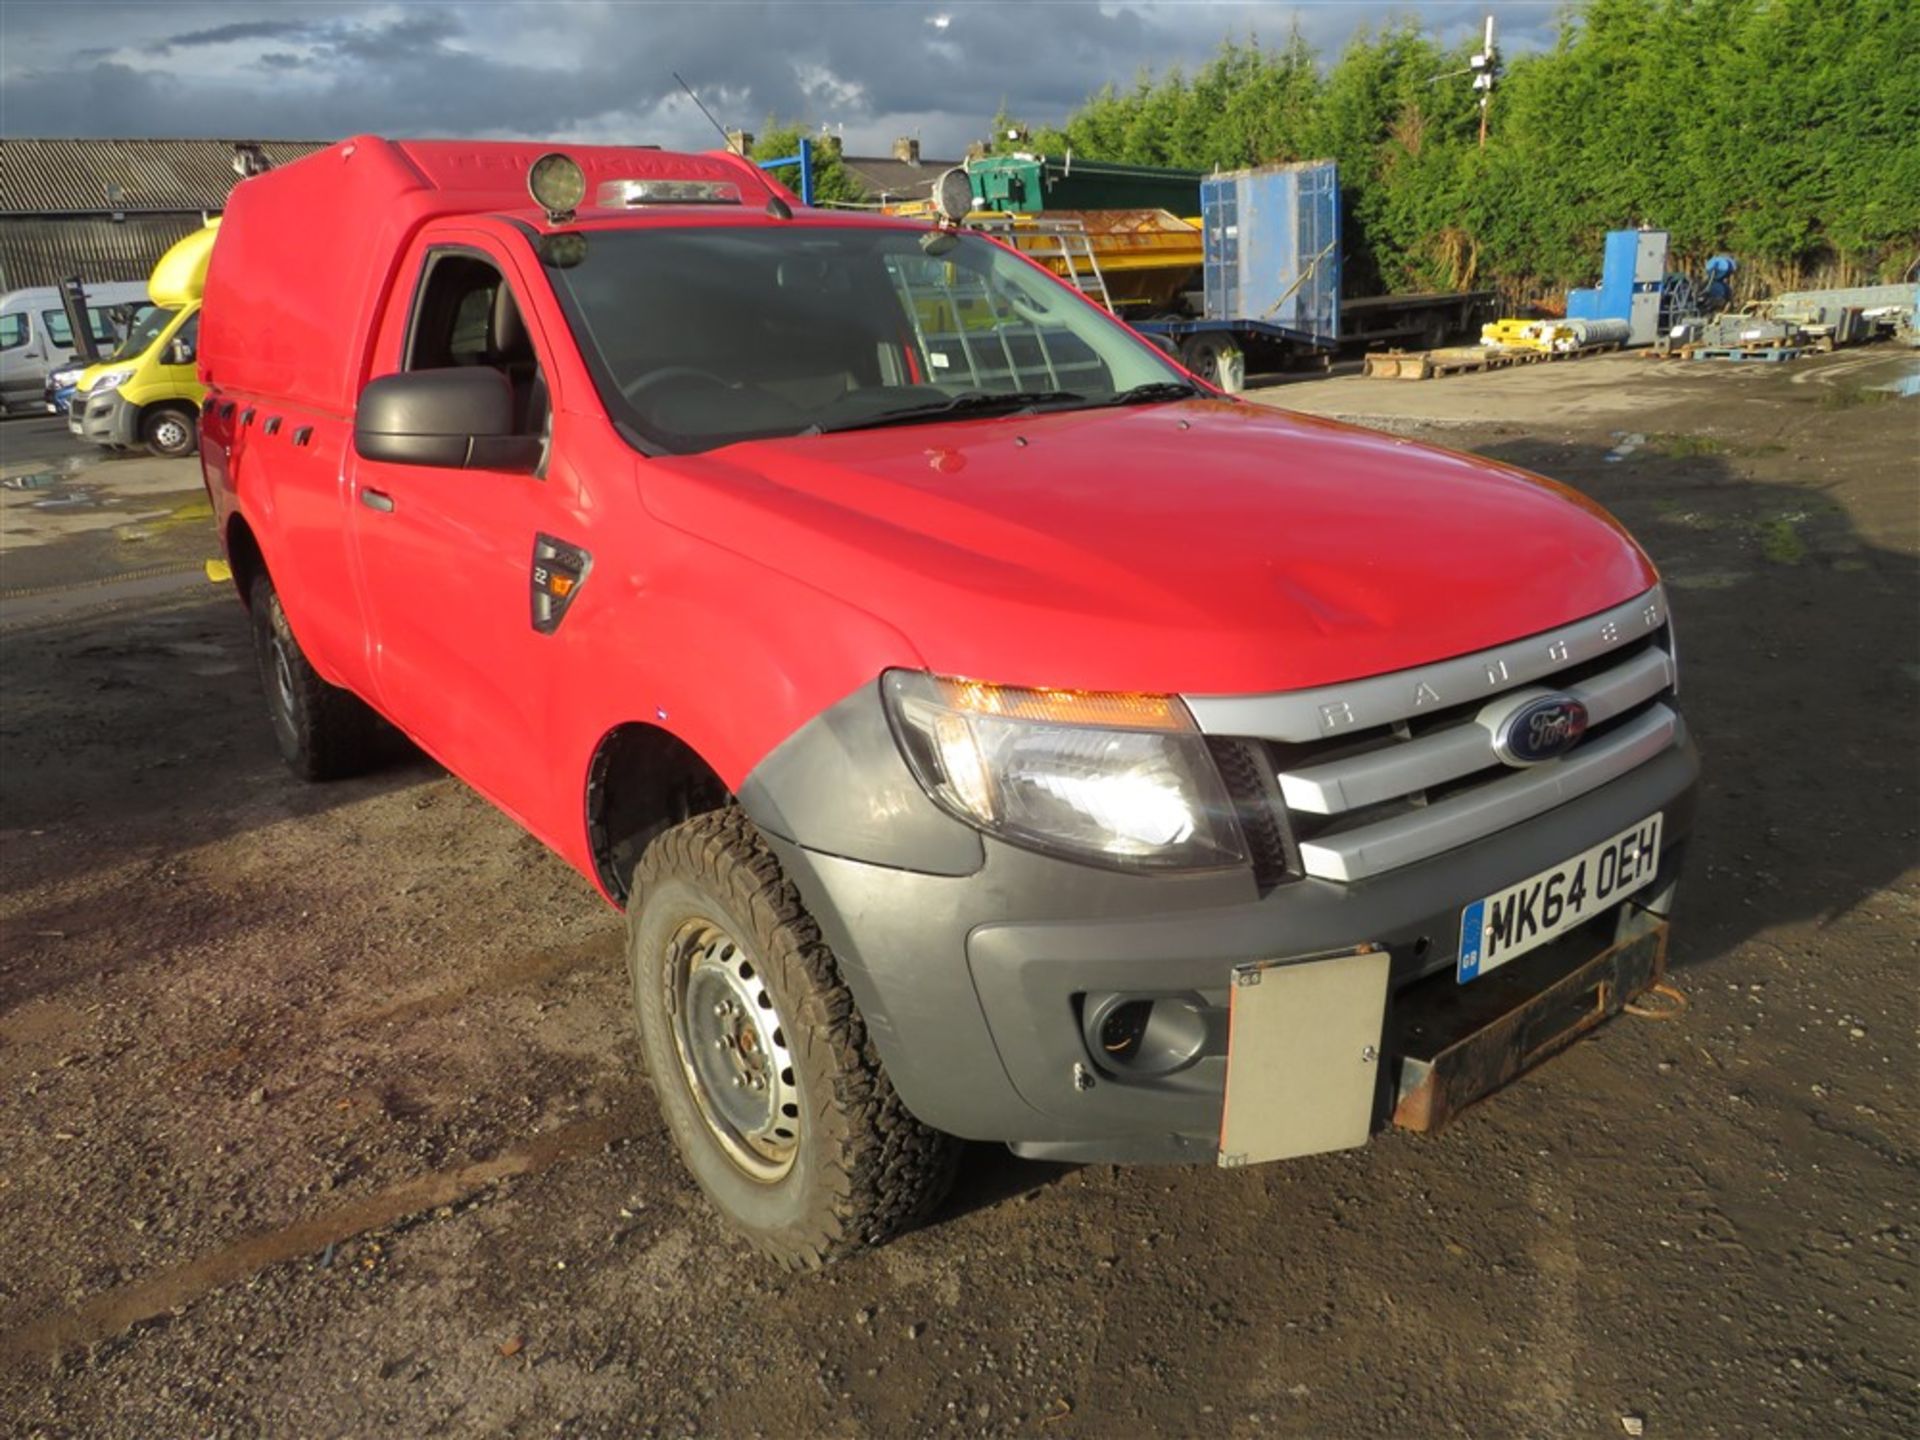 64 reg FORD RANGER XL 4x4 TDCI, 1ST REG 09/14, 120903M WARRANTED, V5 HERE, 1 OWNER FROM NEW [NO